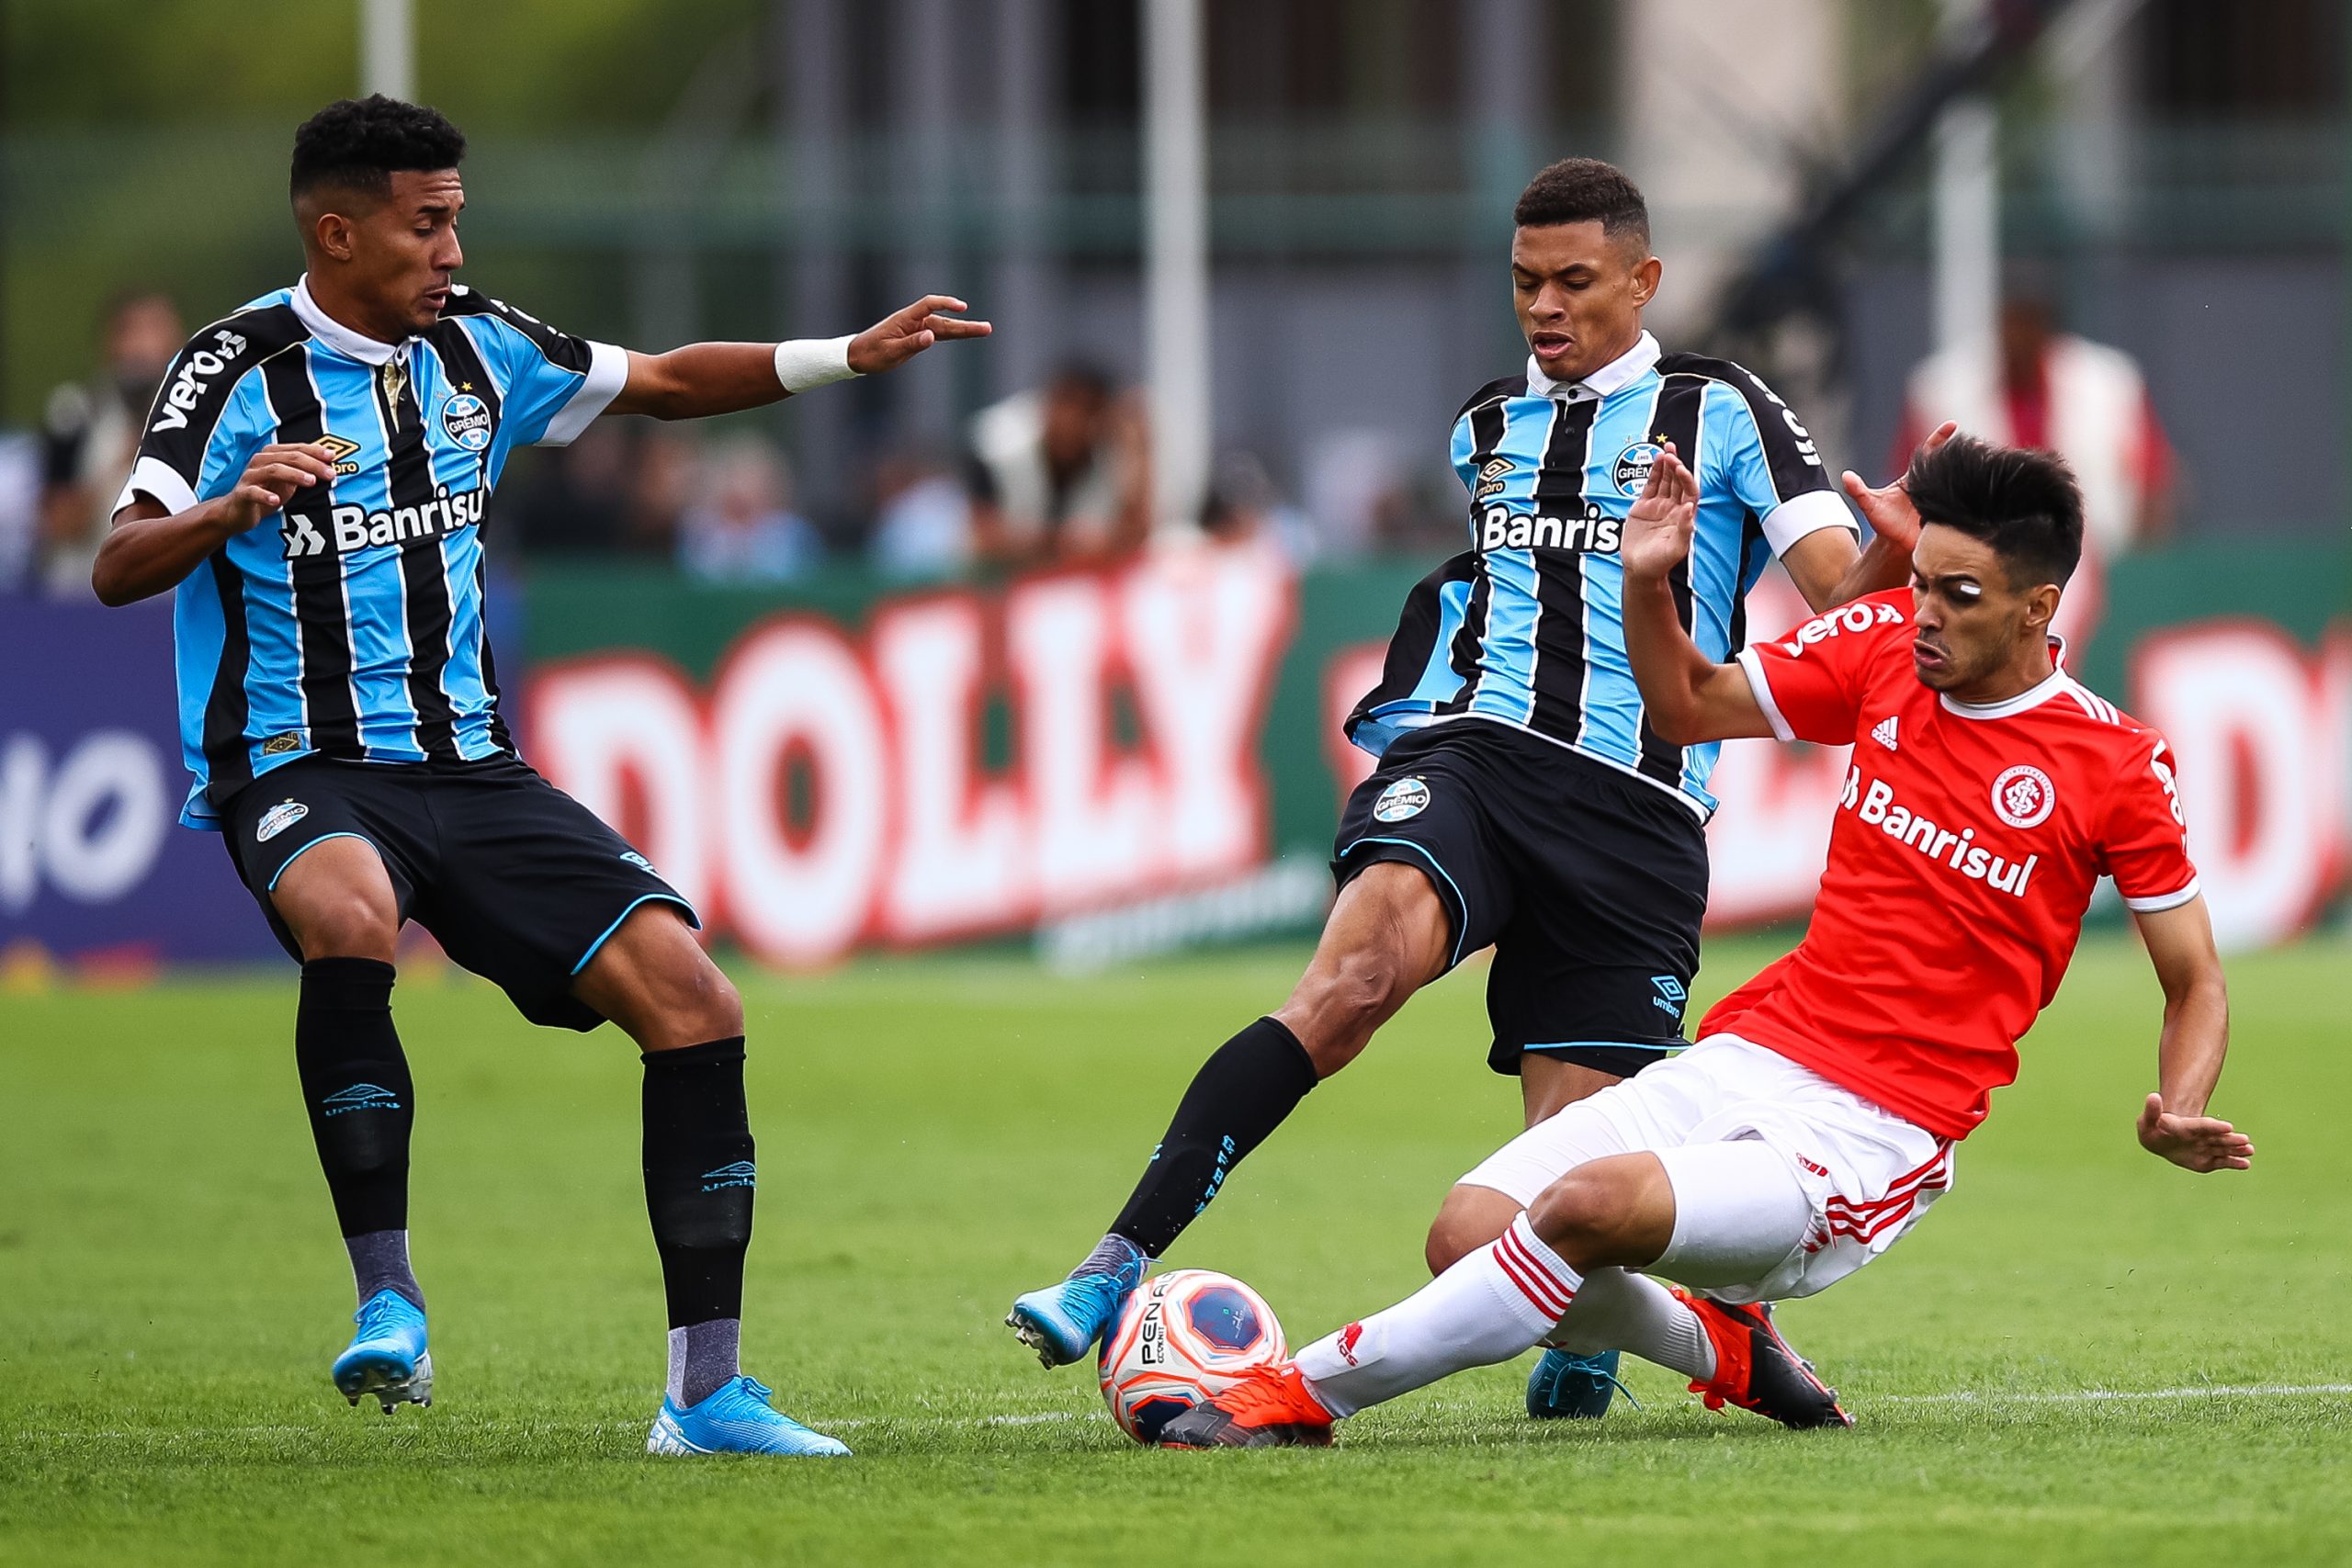 Manchester City close to signing Gremio midfielder Diego Rosa who is in action in the picture